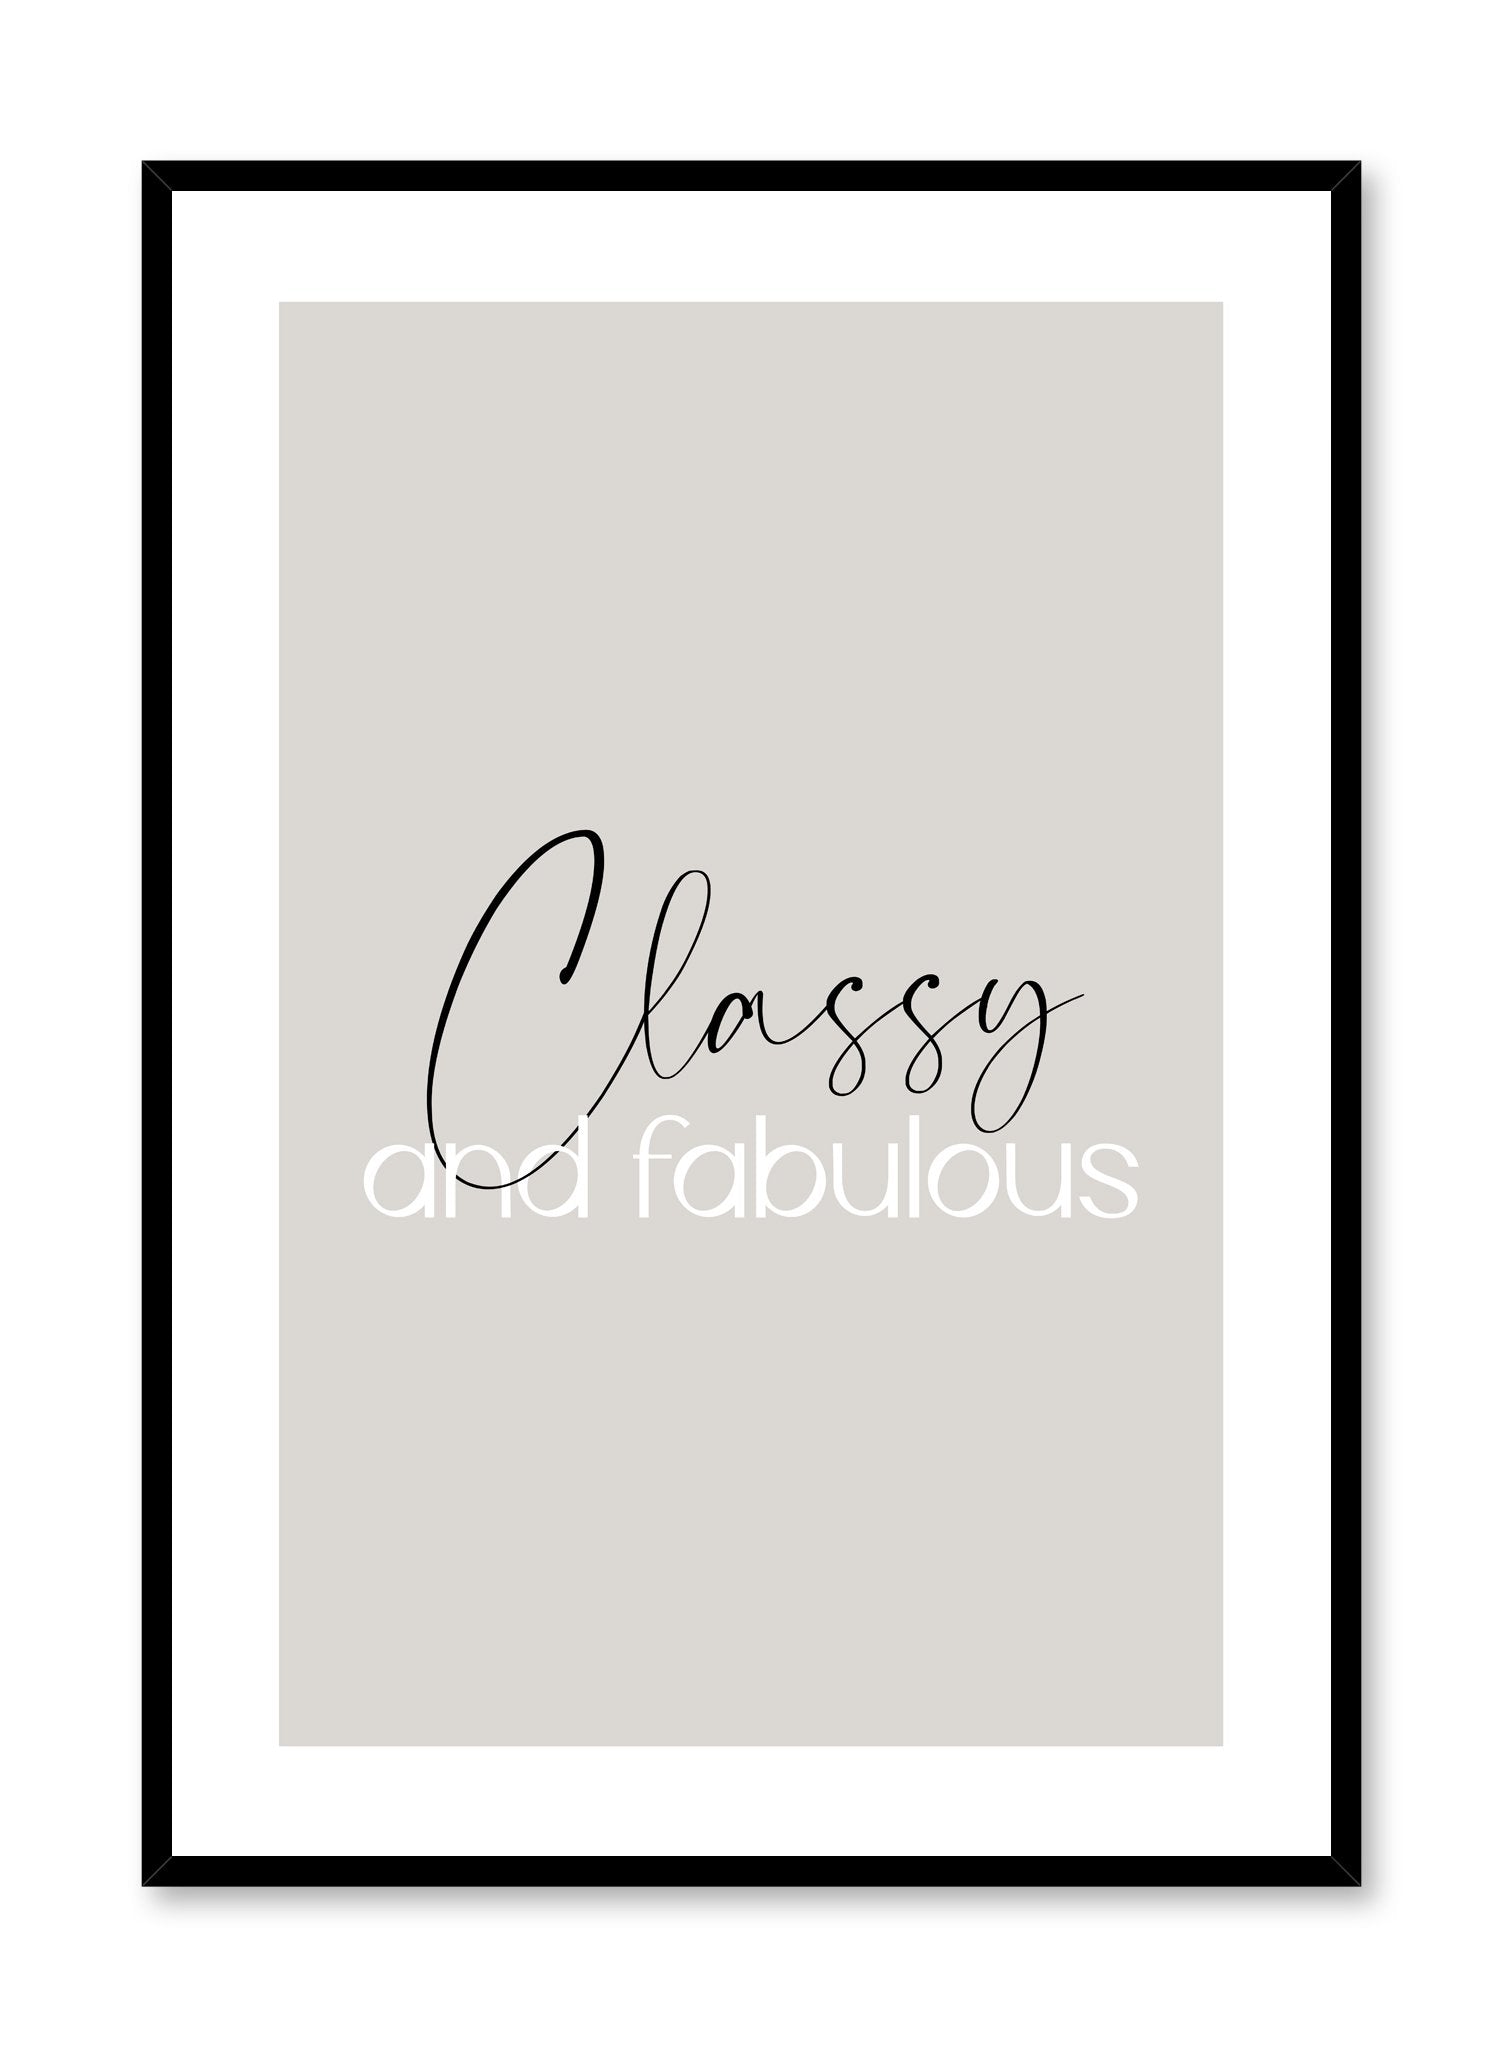 Typography poster by Opposite Wall with quote "Classy fabulous"